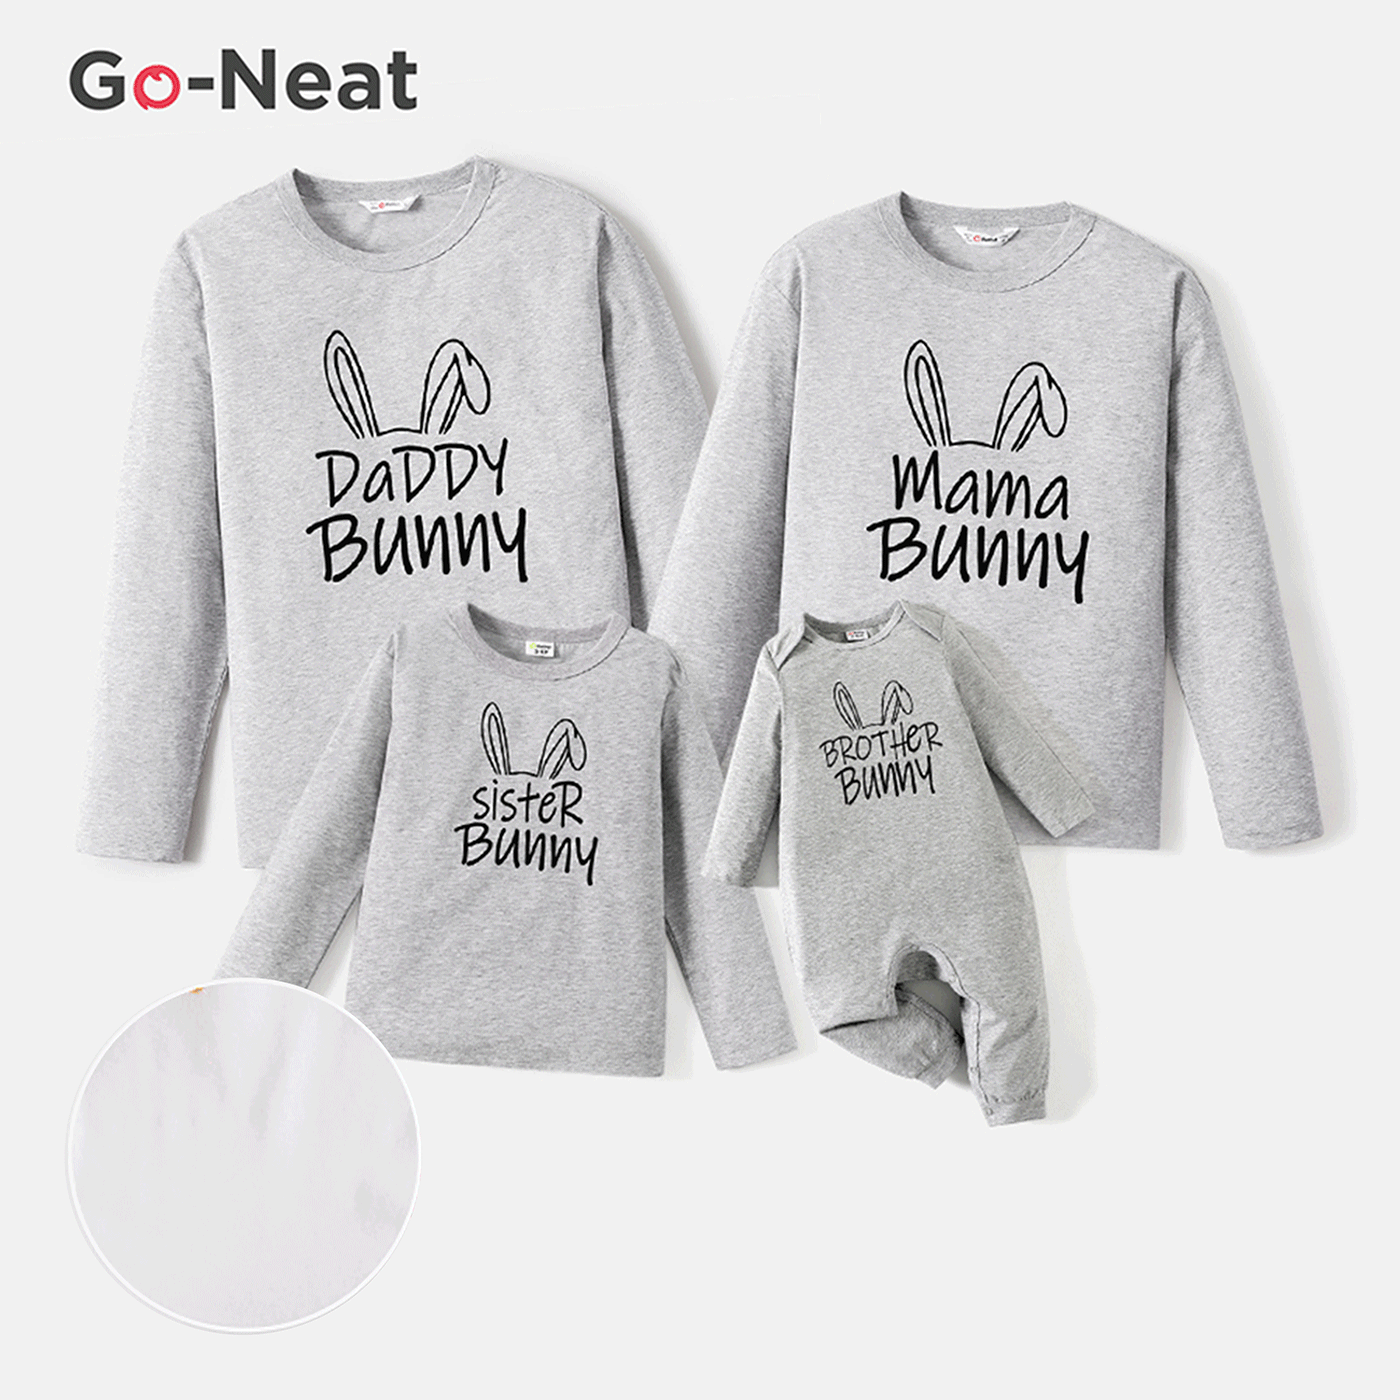 Go-Neat Water Repellent and Stain Resistant Family Matching Rabbit Ears & Letter Print Long-sleeve Tee Light Grey image 1